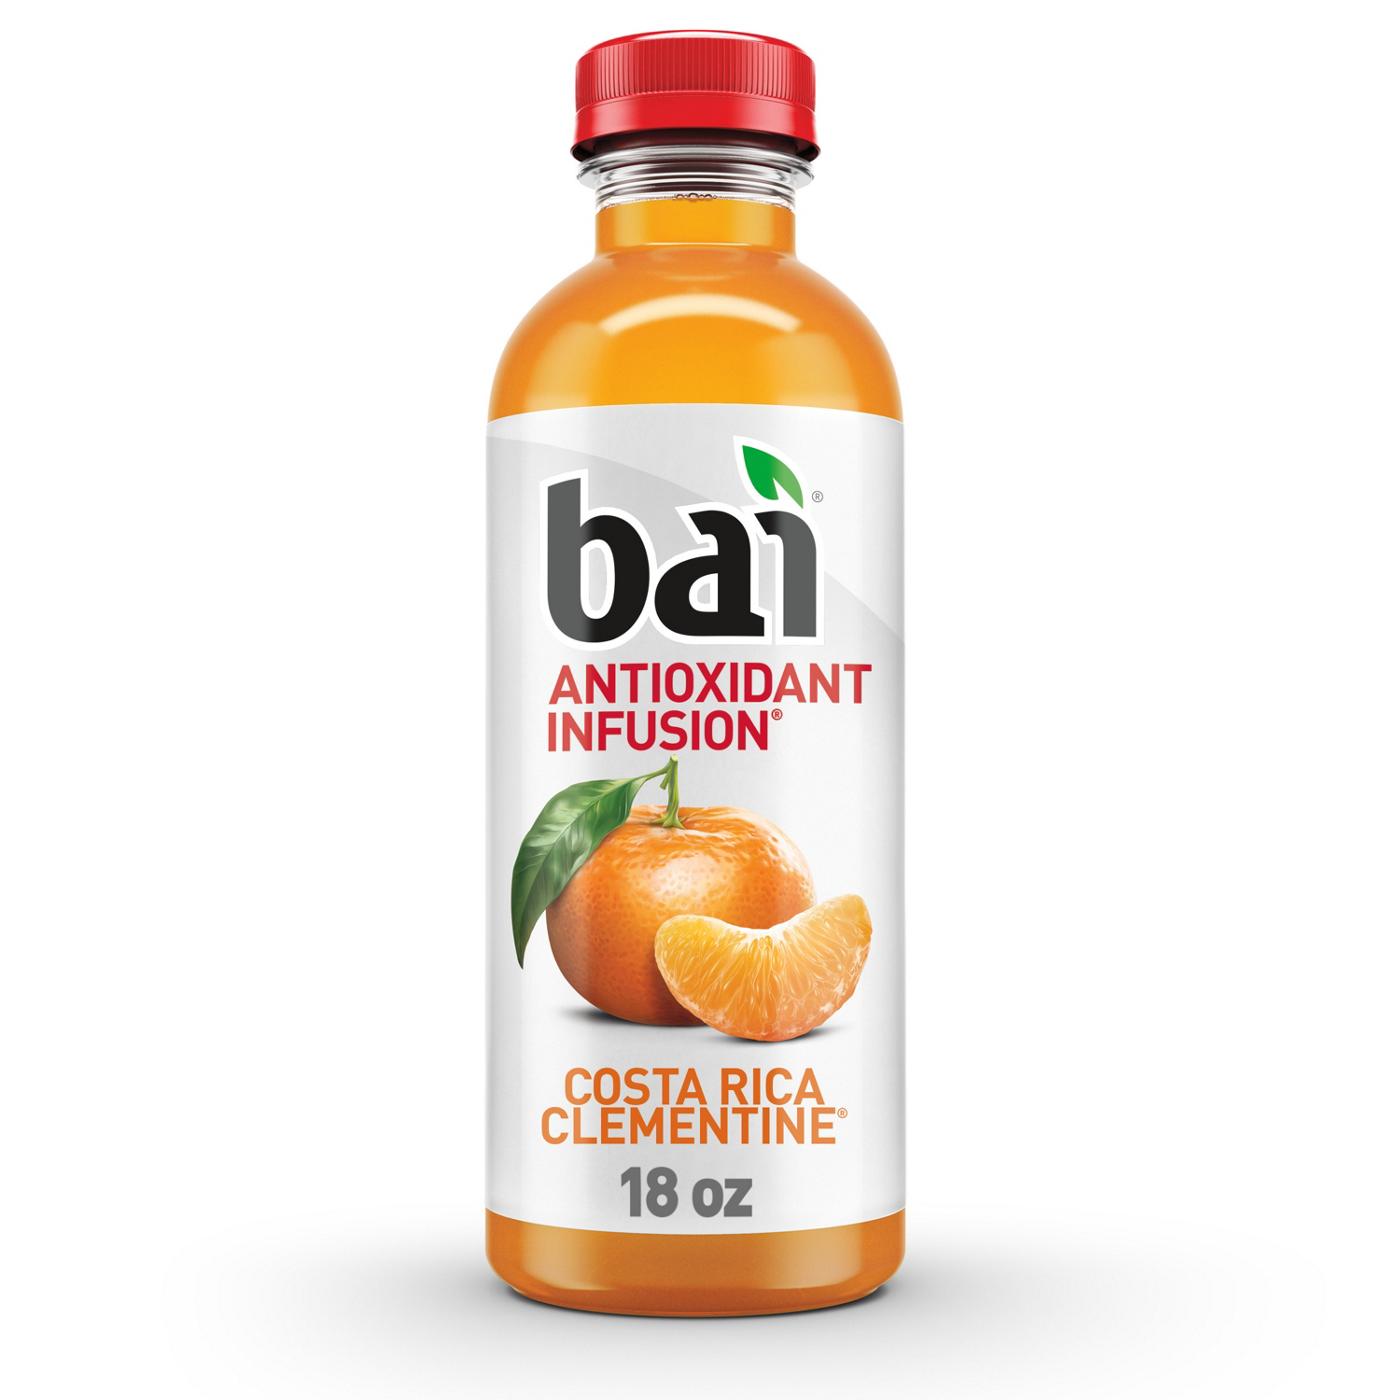 Bai 5 Antioxidant Infusions Costa Rica Clementine Beverage; image 1 of 4